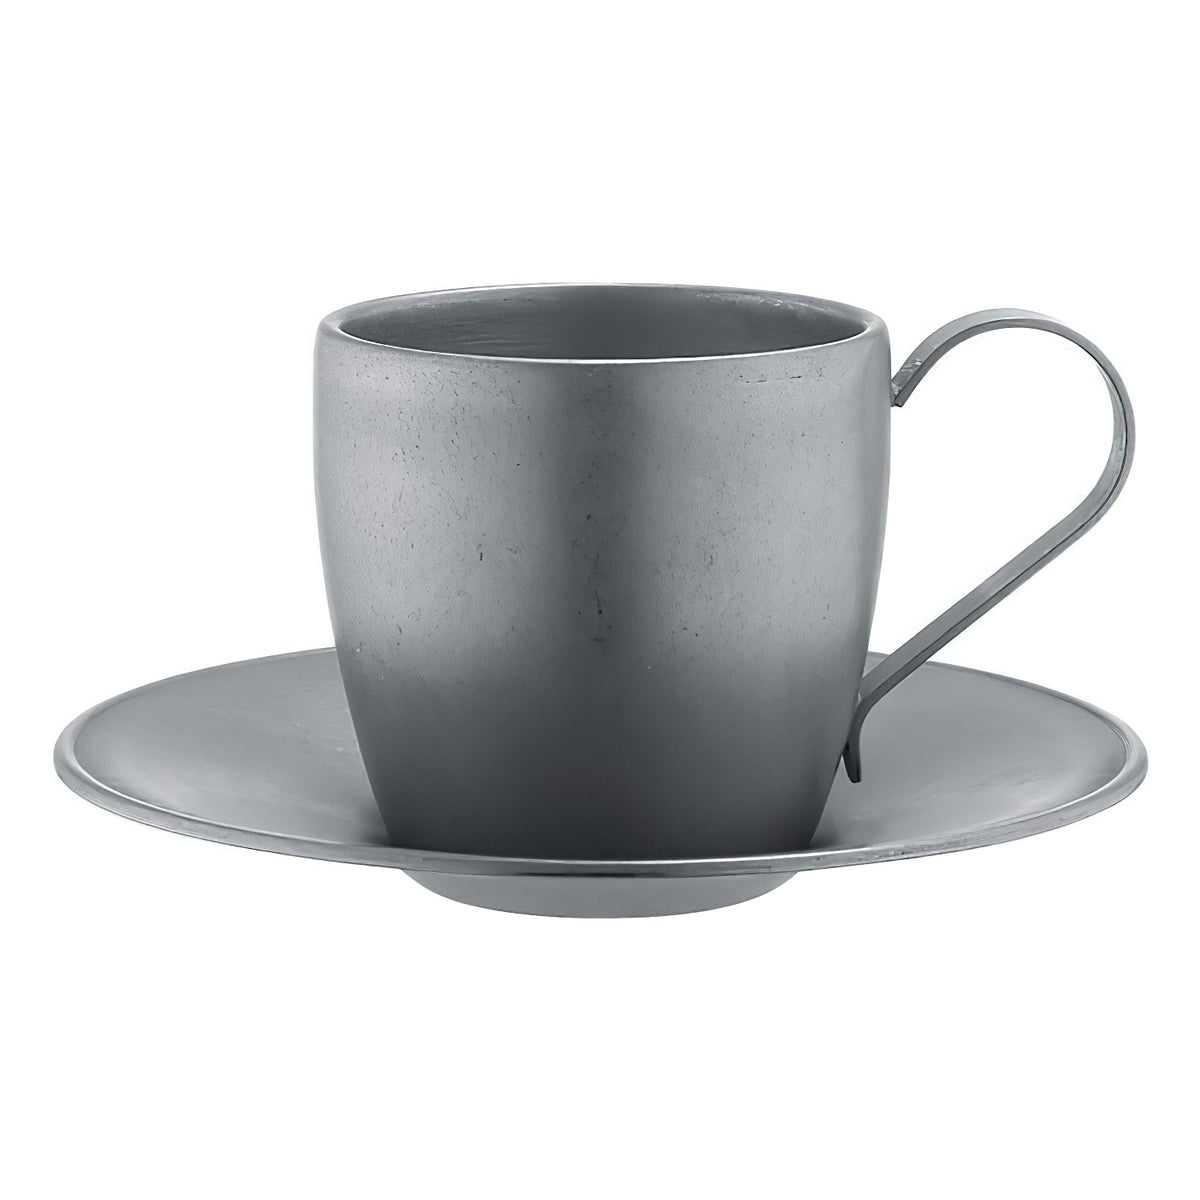 https://www.globalkitchenjapan.com/cdn/shop/products/AoyoshiVintageStainlessSteelCup_Saucer_1200x.jpg?v=1642601218